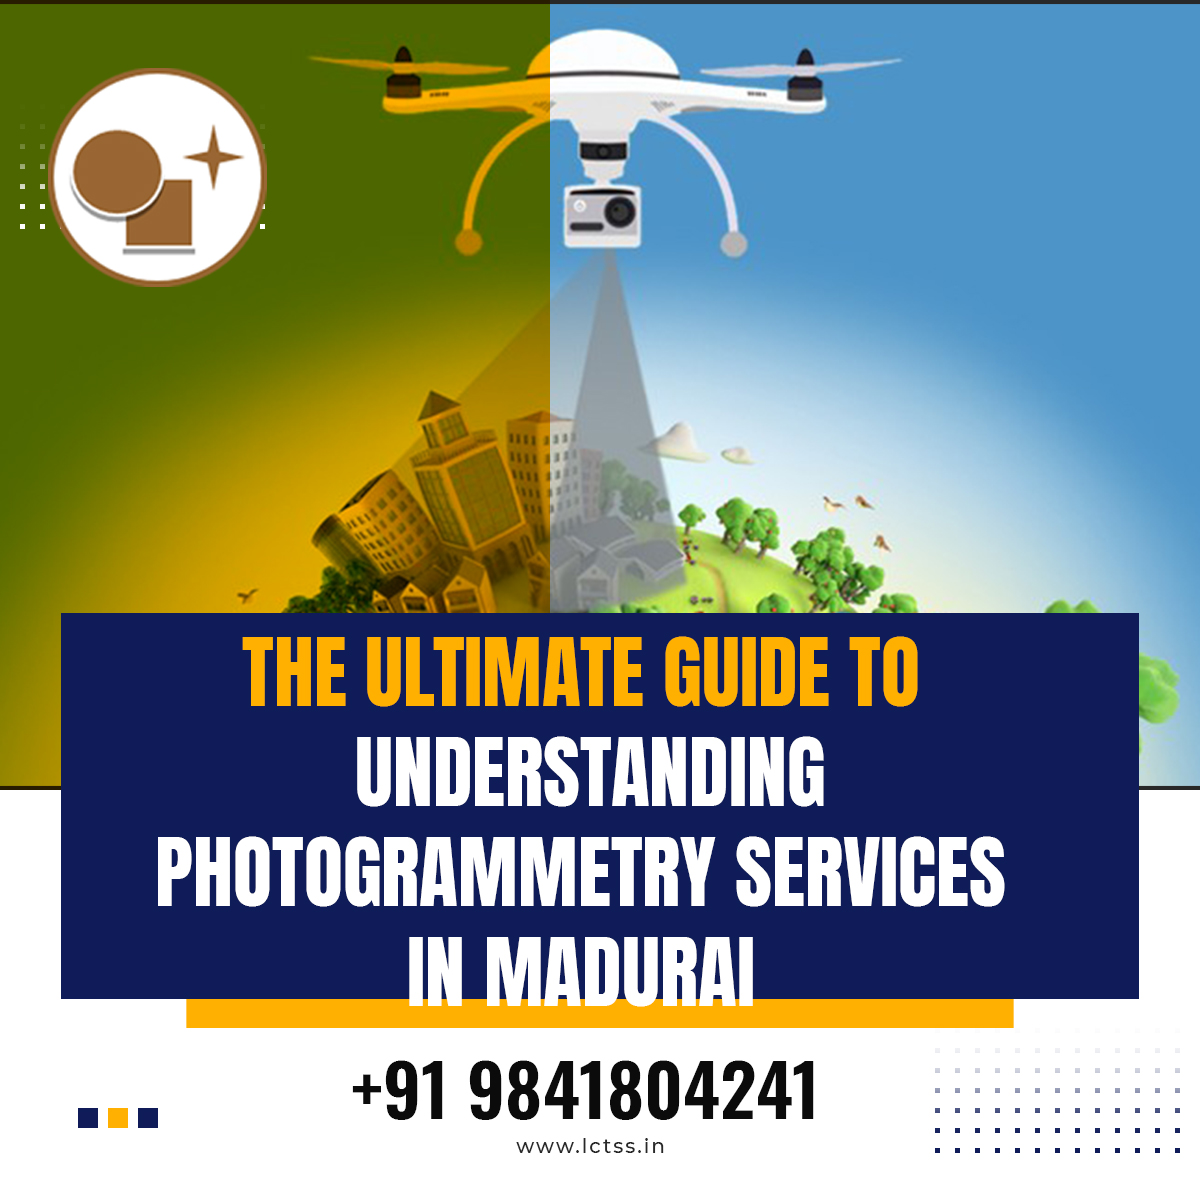 The Ultimate Guide to Understanding Photogrammetry Services in Madurai